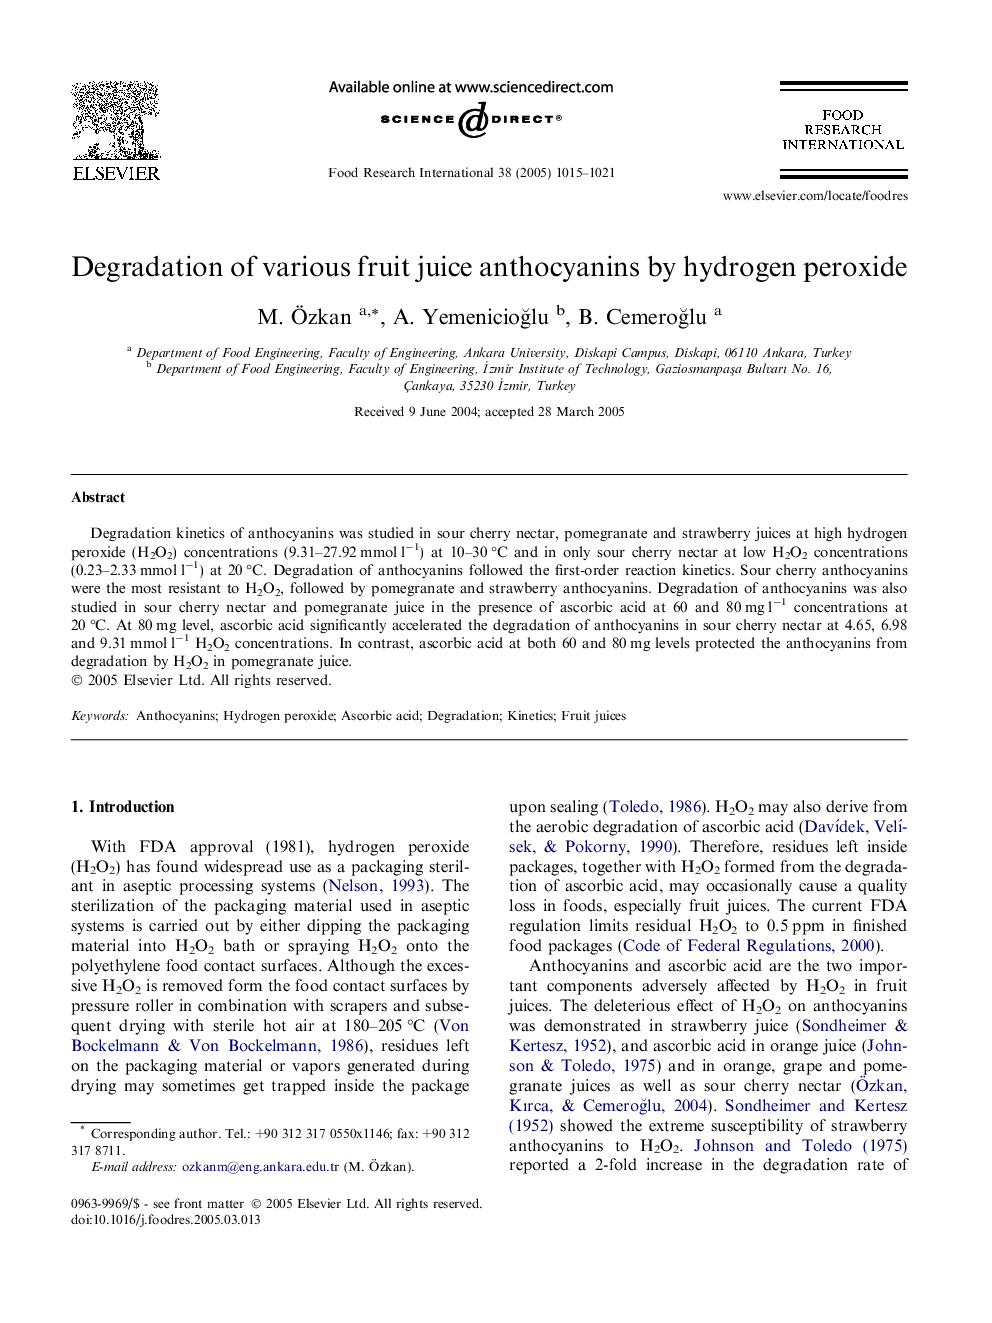 Degradation of various fruit juice anthocyanins by hydrogen peroxide